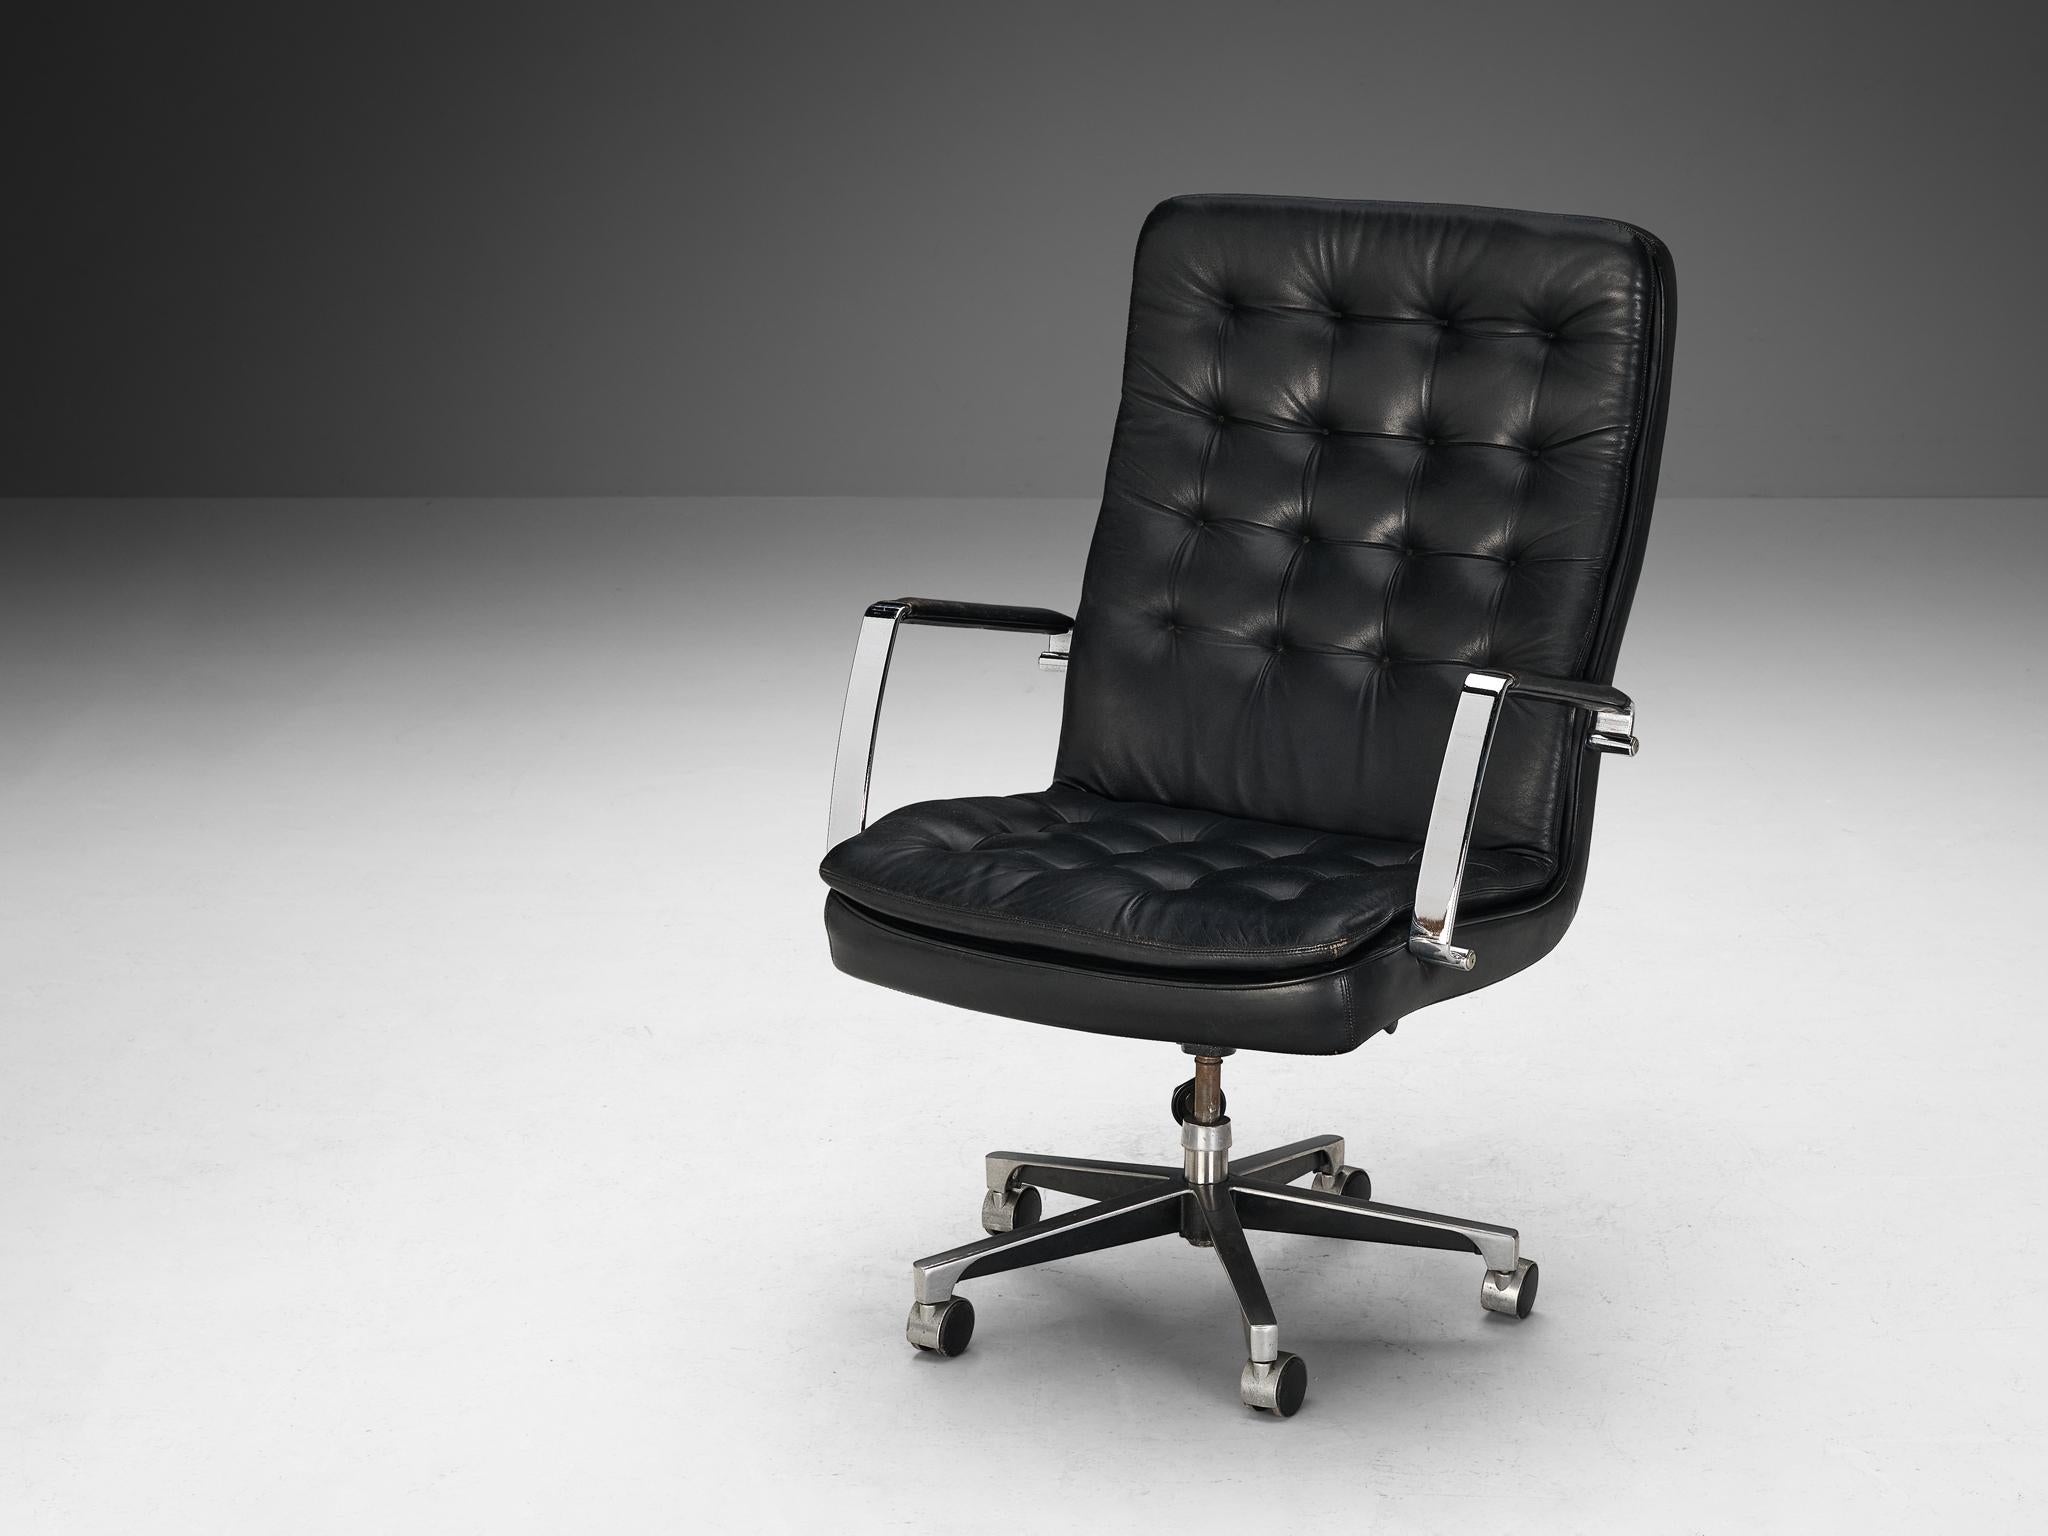 Dux of Sweden, office chair, leather, chrome-plated steel, aluminum, Sweden, 1970s

This comfortable and fully adjustable swiveling executive armchair is upholstered in black leather. The construction is based on a simplified design based on clear